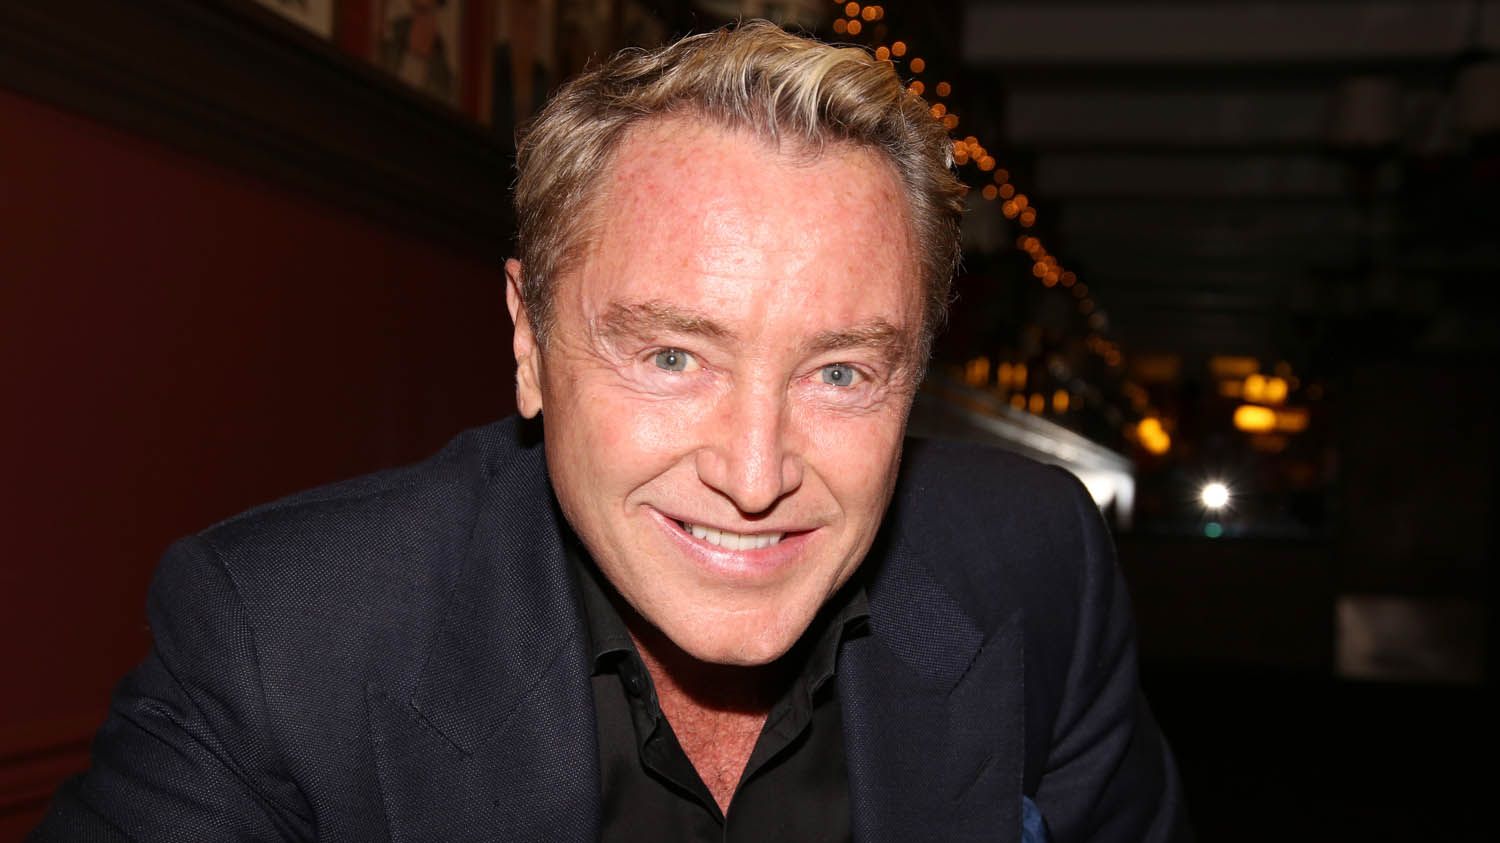 Michael Flatley diagnosed with 'aggressive form of cancer'